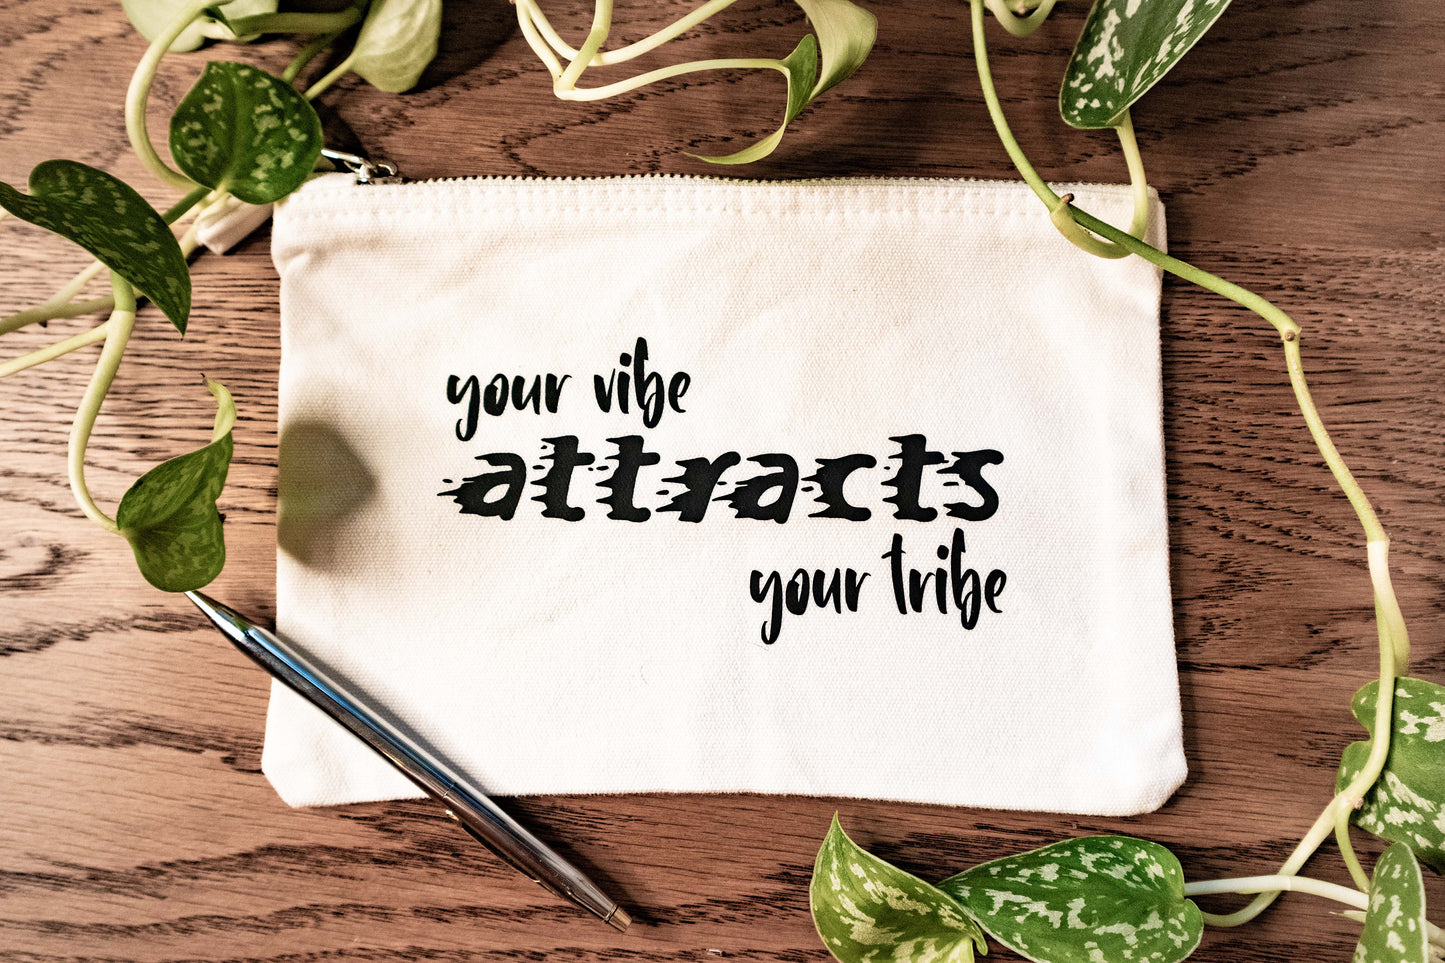 Your vibe attracts your tribe - Funny Cotton Zipper Pouch for Travel, Makeup, toiletries, documents, snack, and more